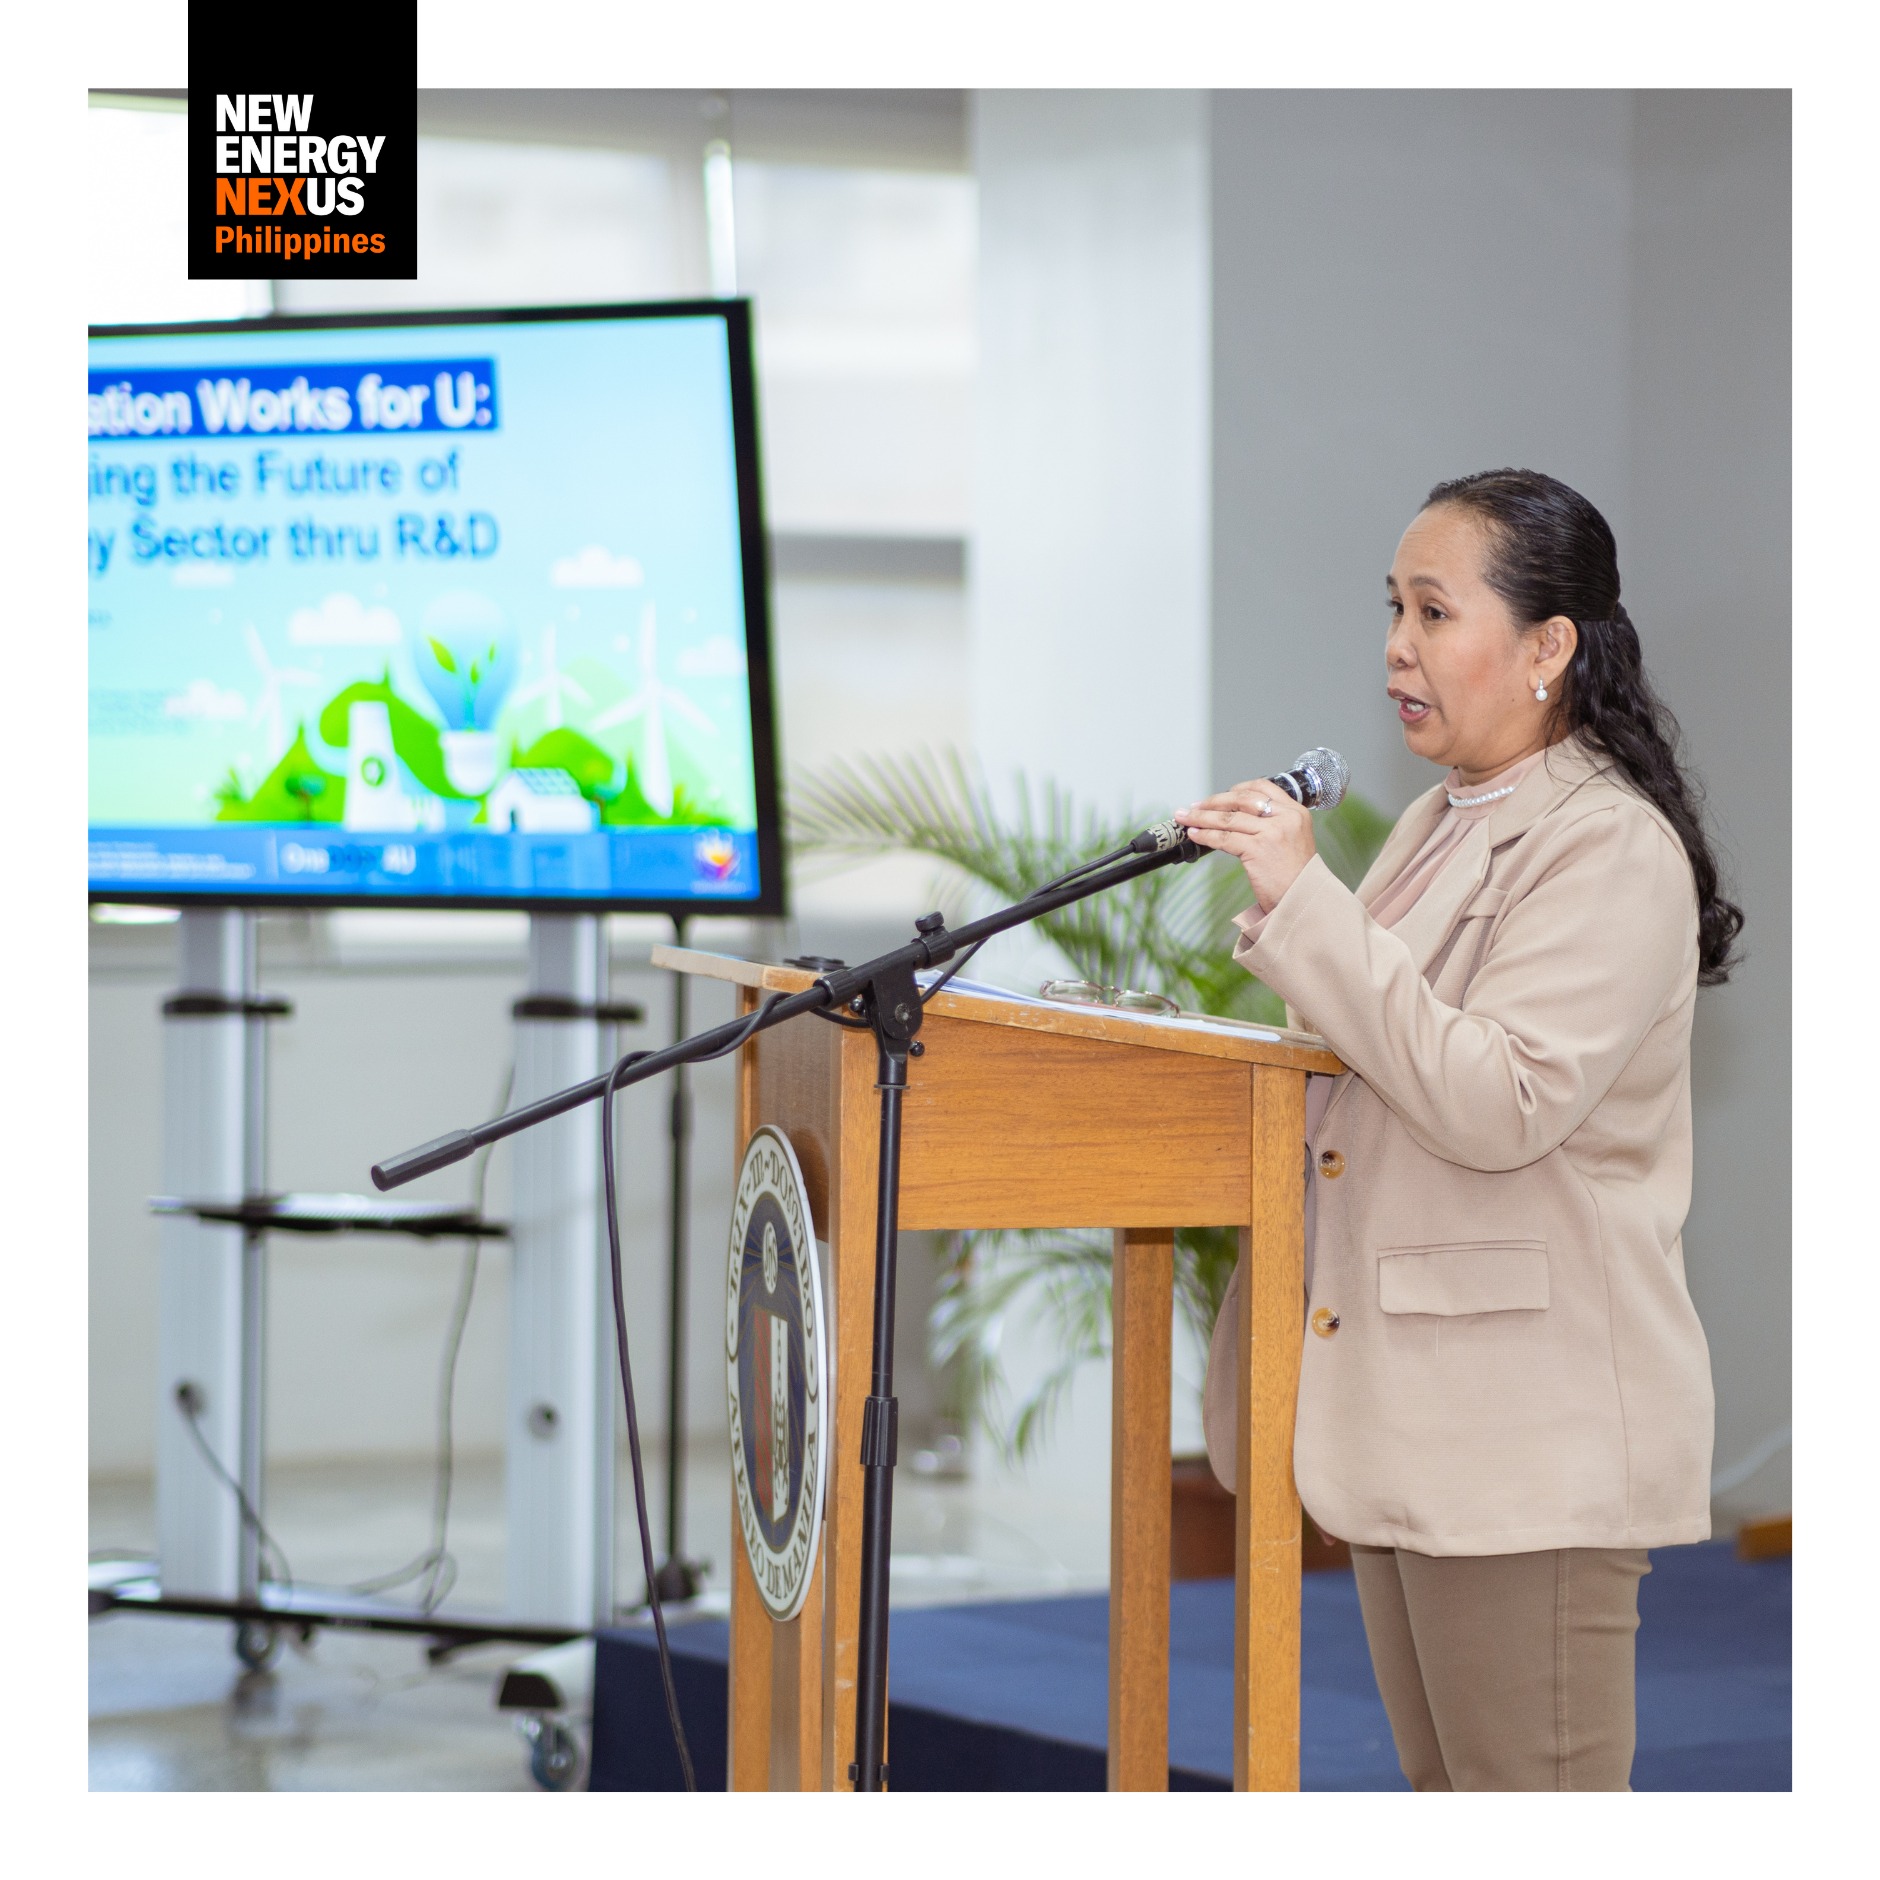 Photo: Keynote speech from Dr Ruby Raterta of DOST-PCIEERD (from New Energy Nexus Philippines Facebook page)